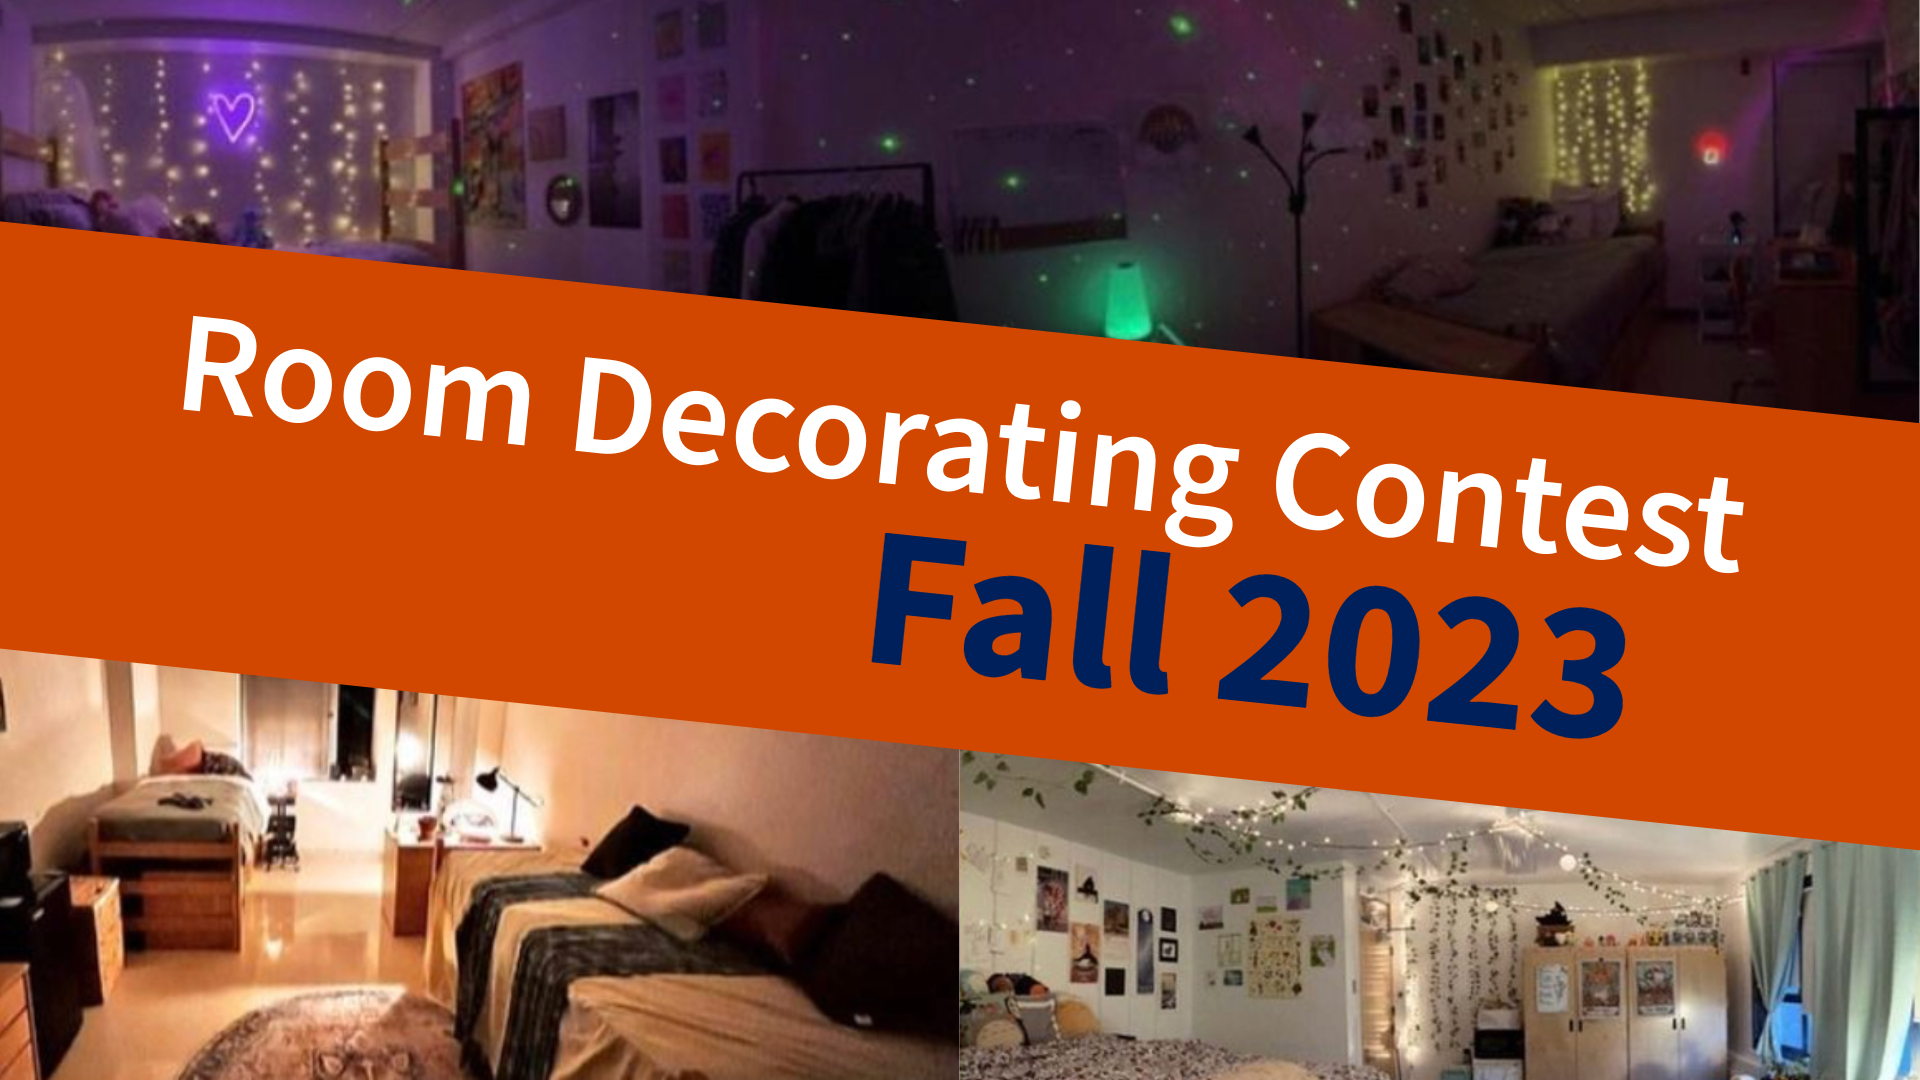 Salem State room decorating contest 2023. Photos of decorated dorm rooms includ…